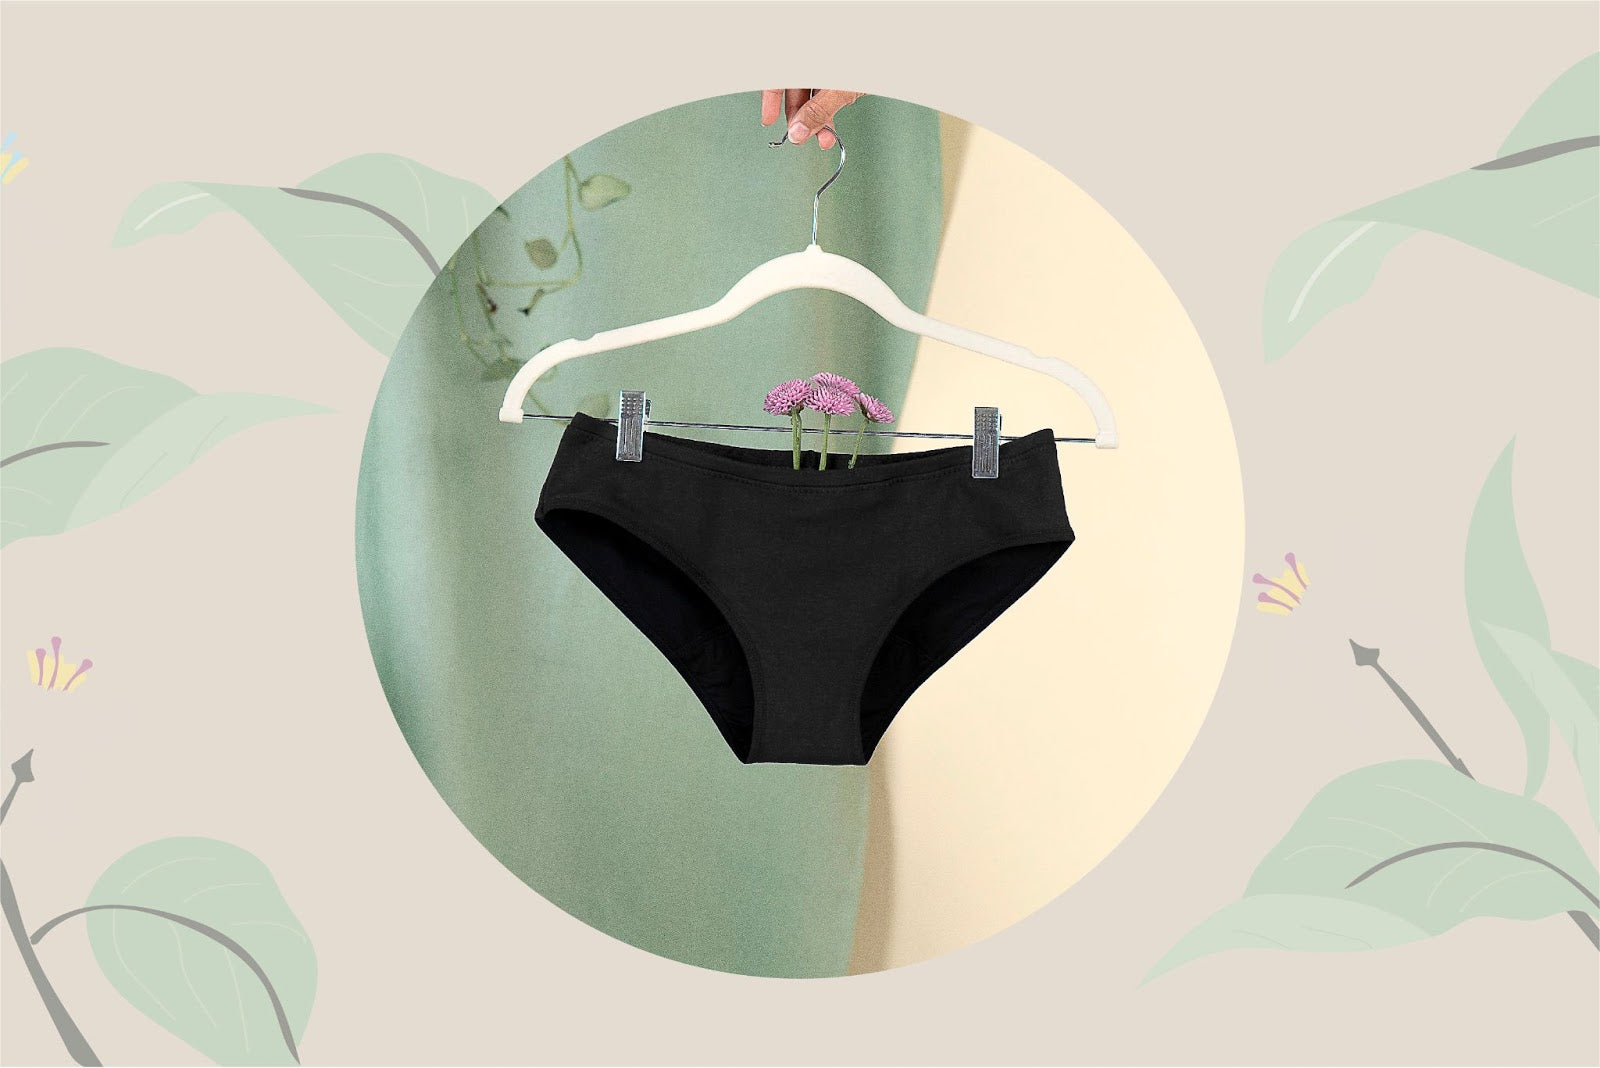 Disposable period panties that are apt for heavy flow days - Times